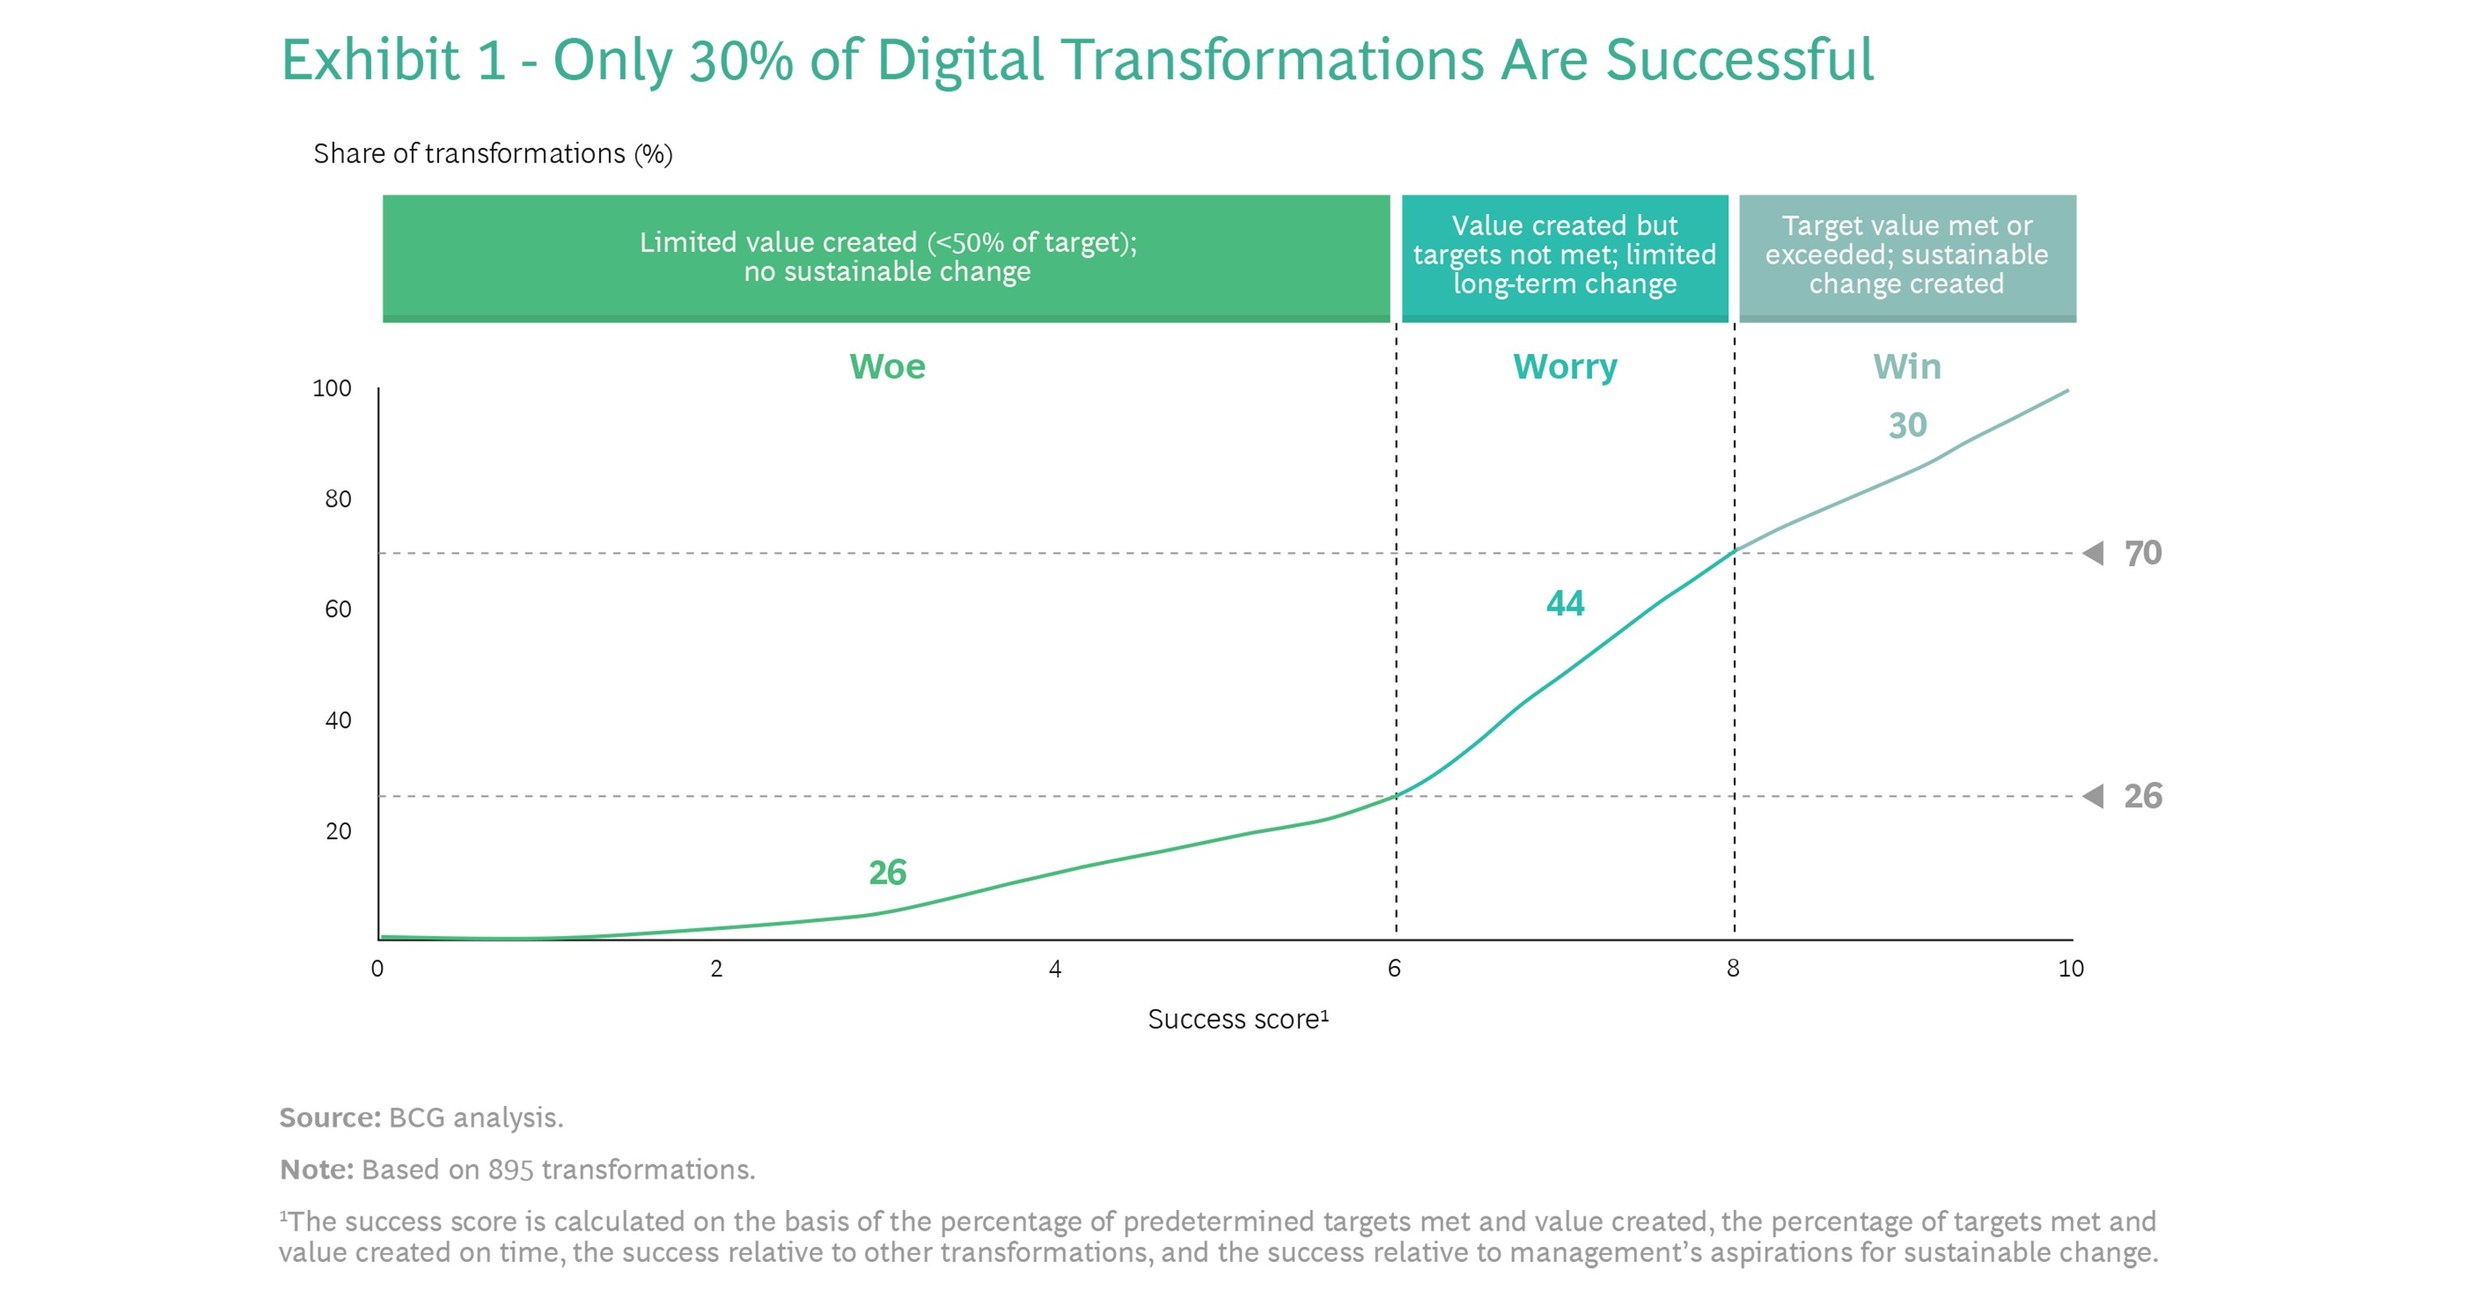 Companies Can Flip the Odds of Success in Digital Transformations from 30% to 80%